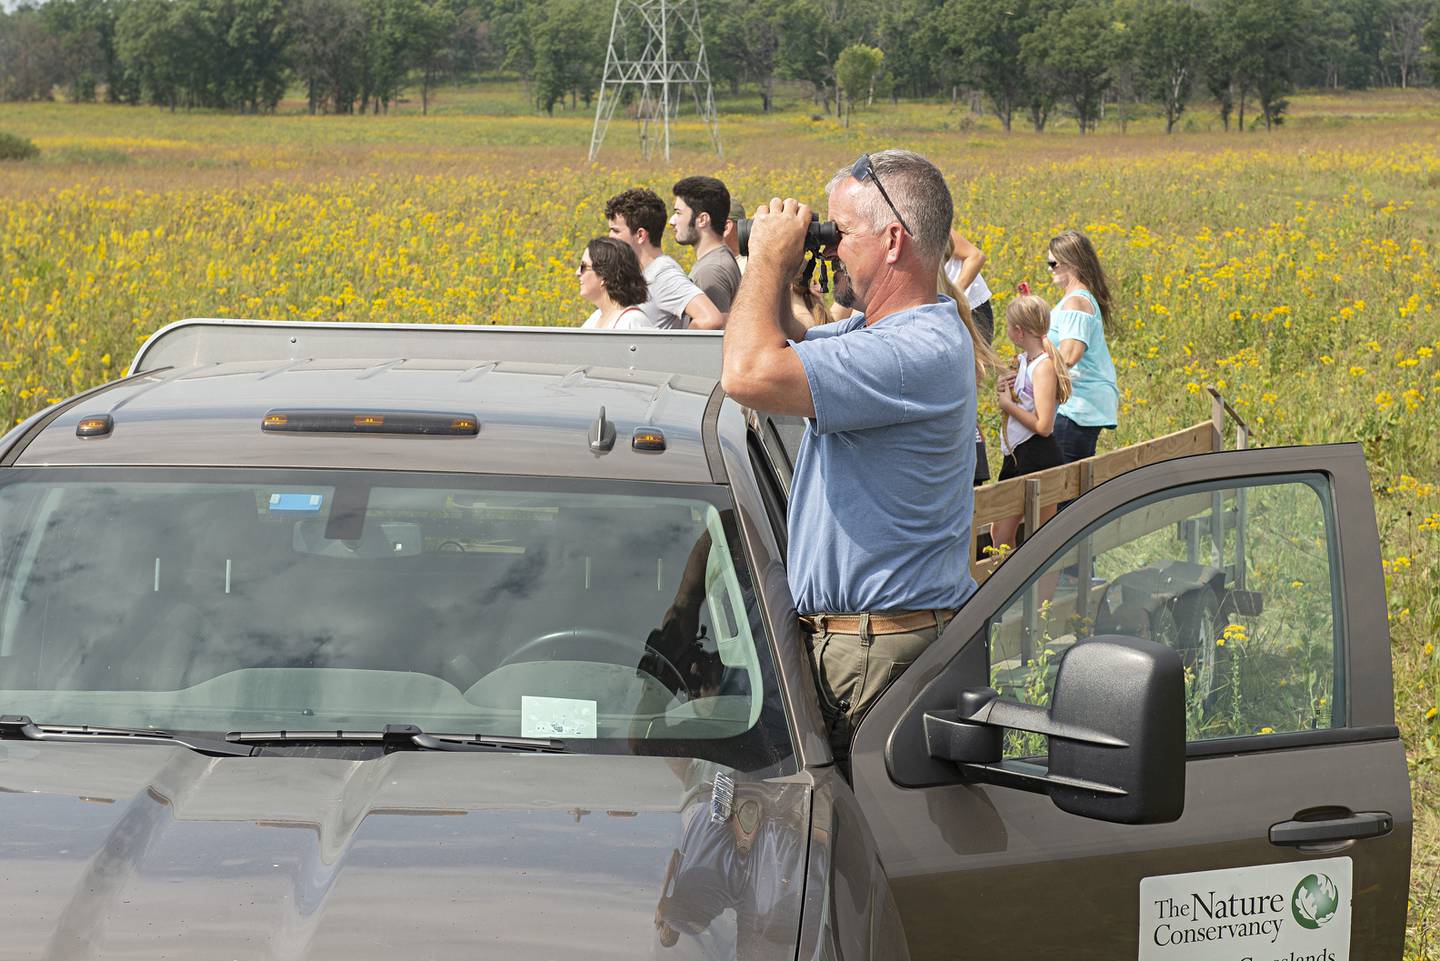 Visitors check out the bison herd Saturday  at  Nachusa Grasslands’ annual Autumn on the Prairie.